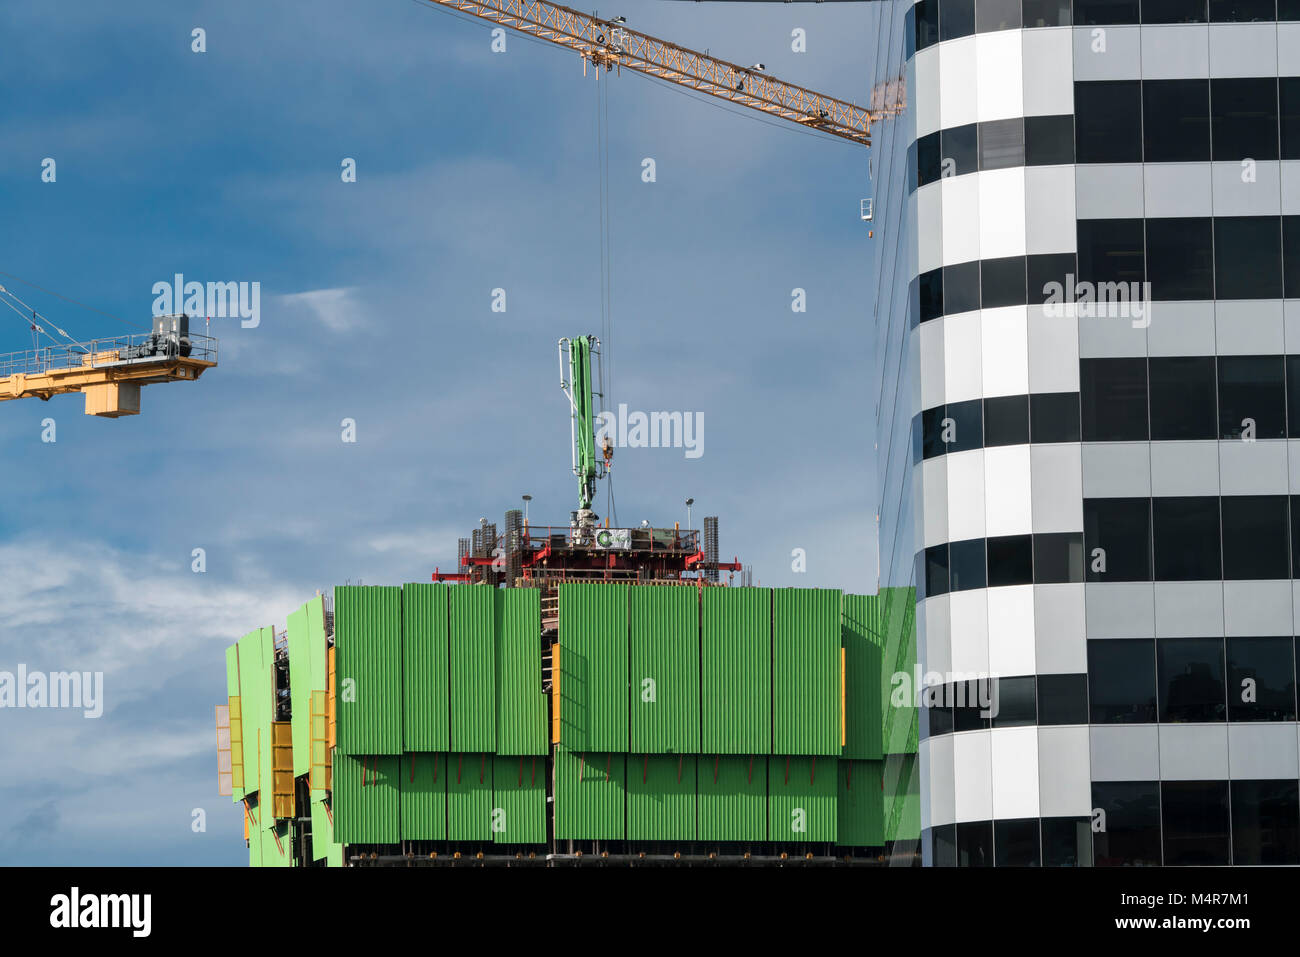 United States, Washington, Seattle, Construction of one building behind another building. Stock Photo